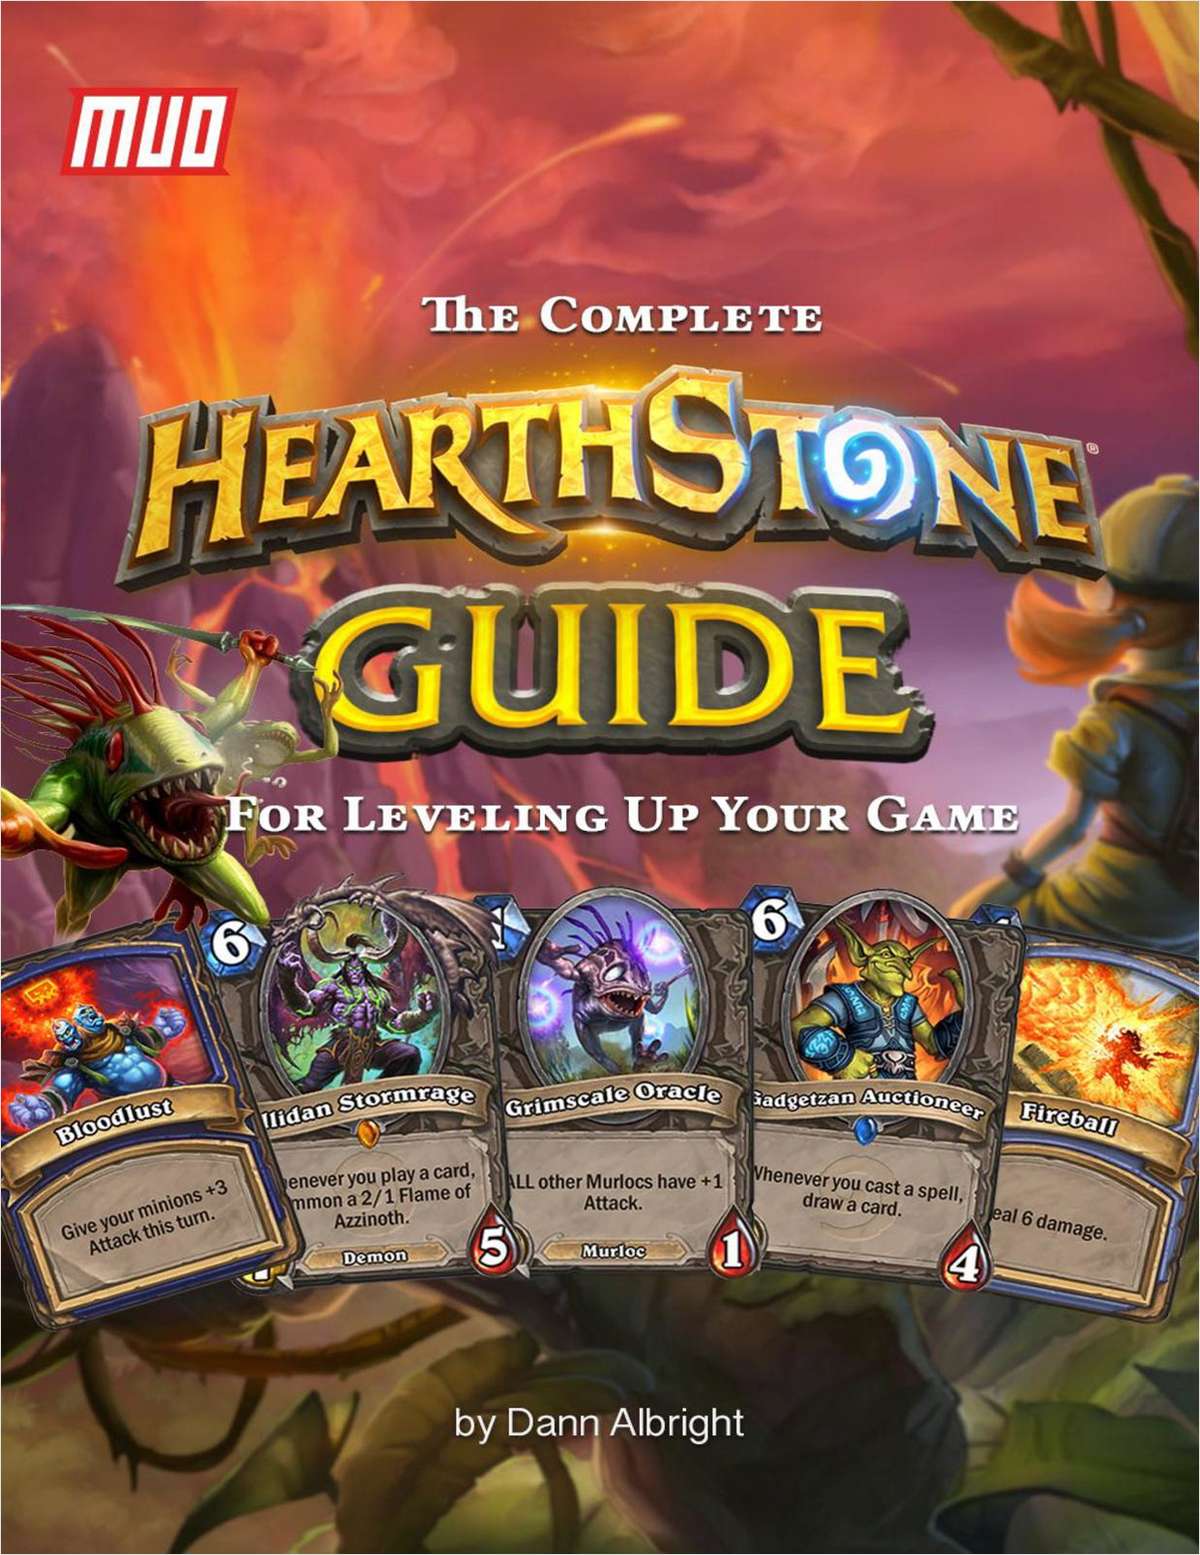 The Complete Hearthstone Guide for Leveling Up Your Game